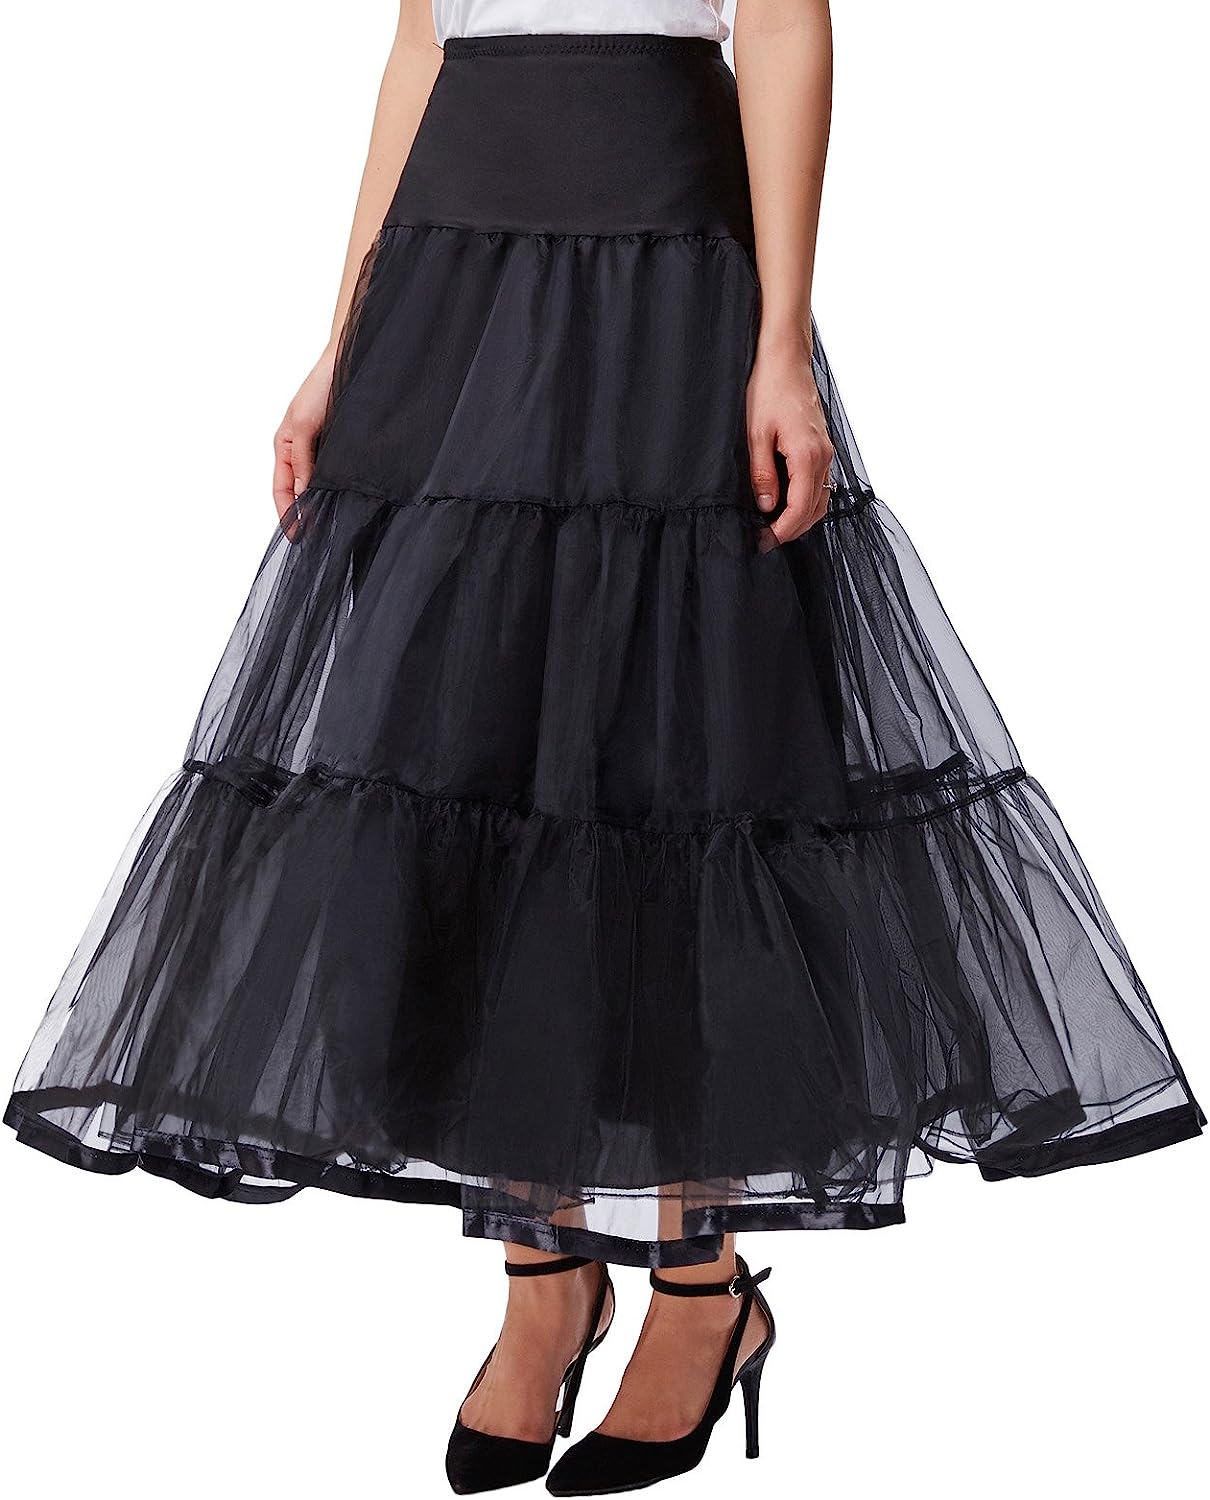 GRACE KARIN Women's Ankle Length Petticoats Wedding Slips: Adding Grace and Volume to Your Dress